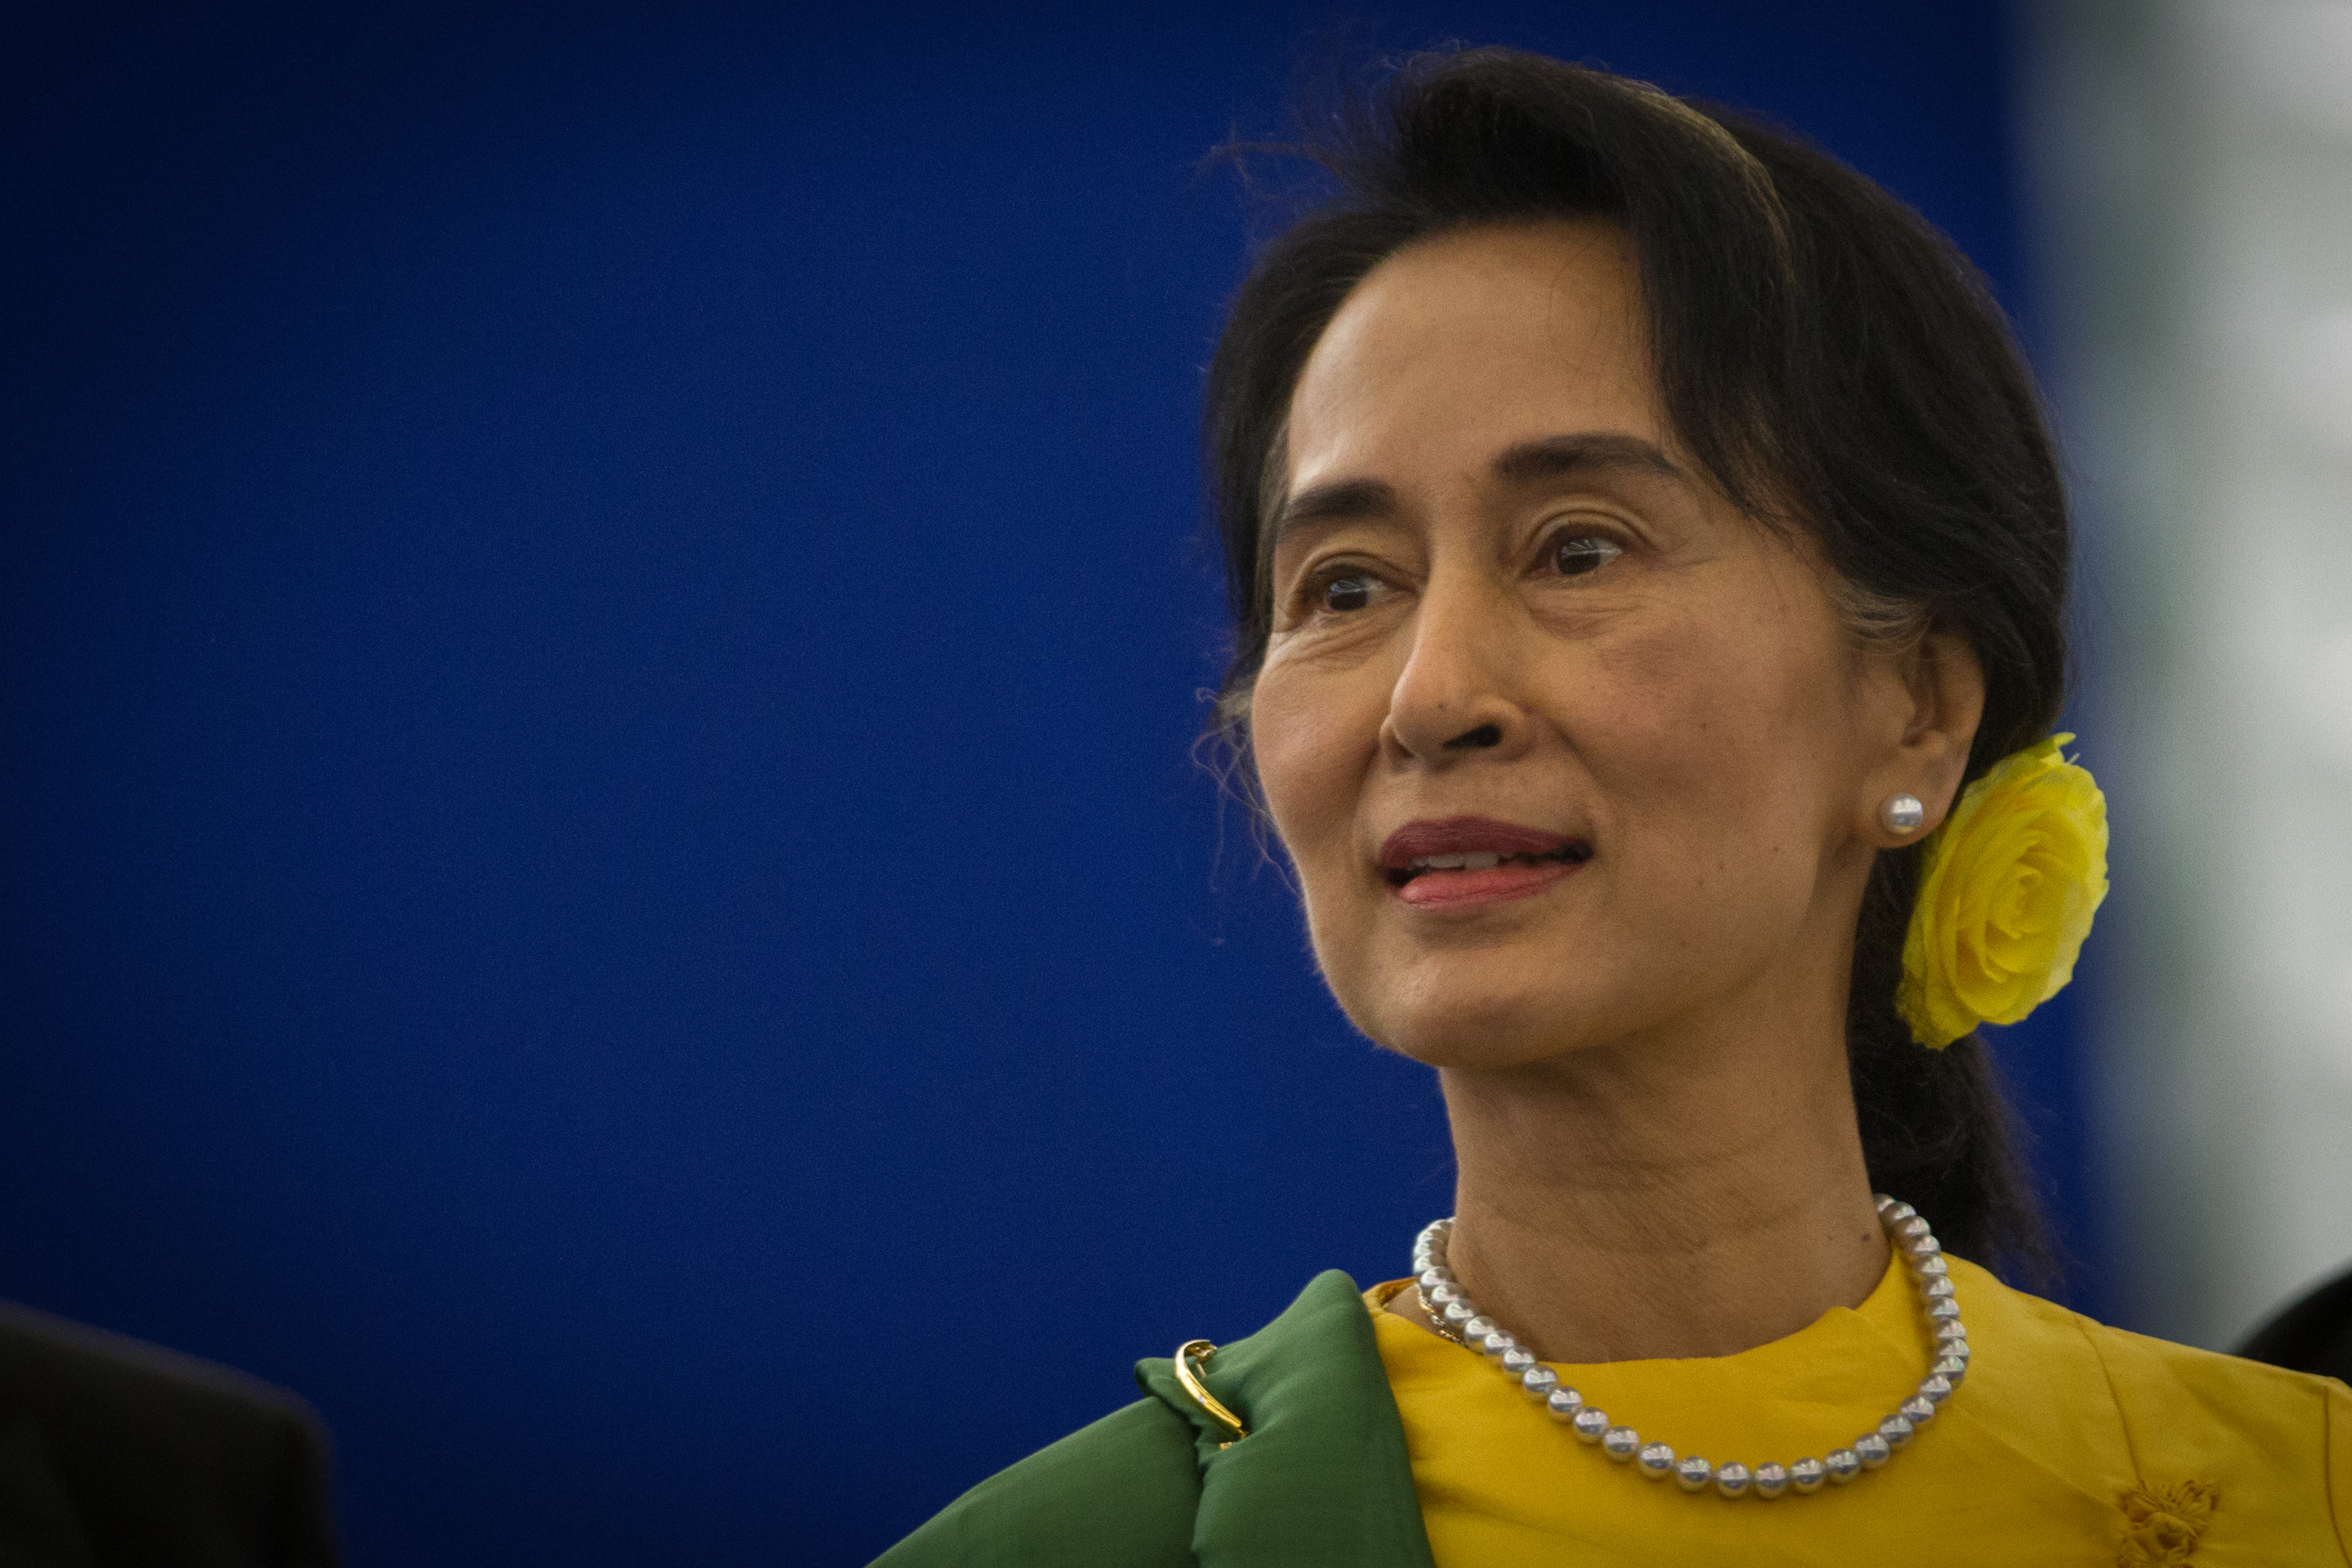 We’re still waiting for Aung San Suu Kyi to stand up for Rohingya Muslims